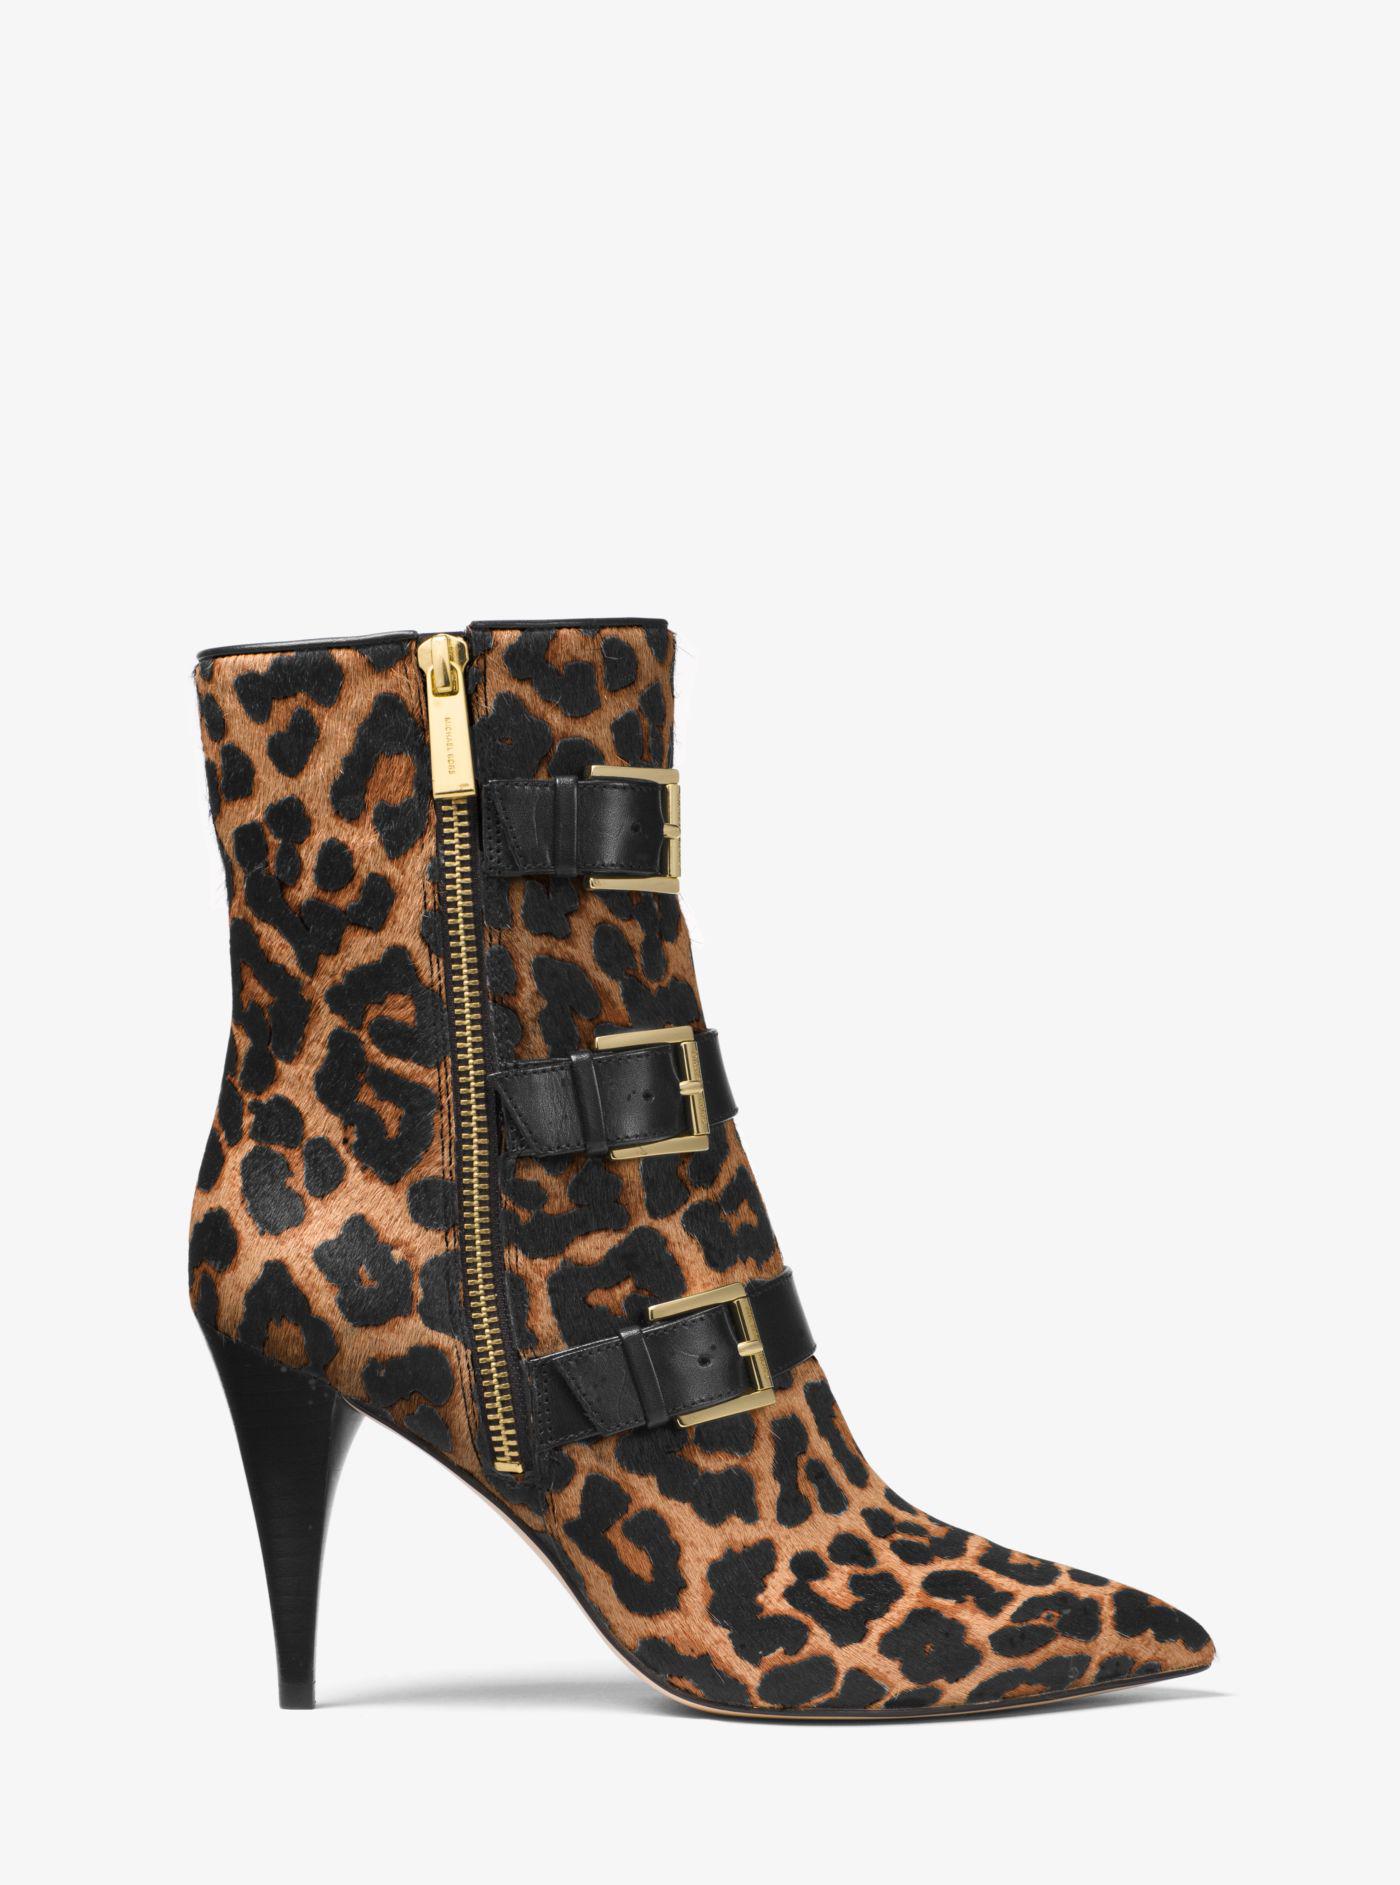 Michael Kors Leather Lori Leopard Calf Hair Ankle Boot in Natural/Black ...